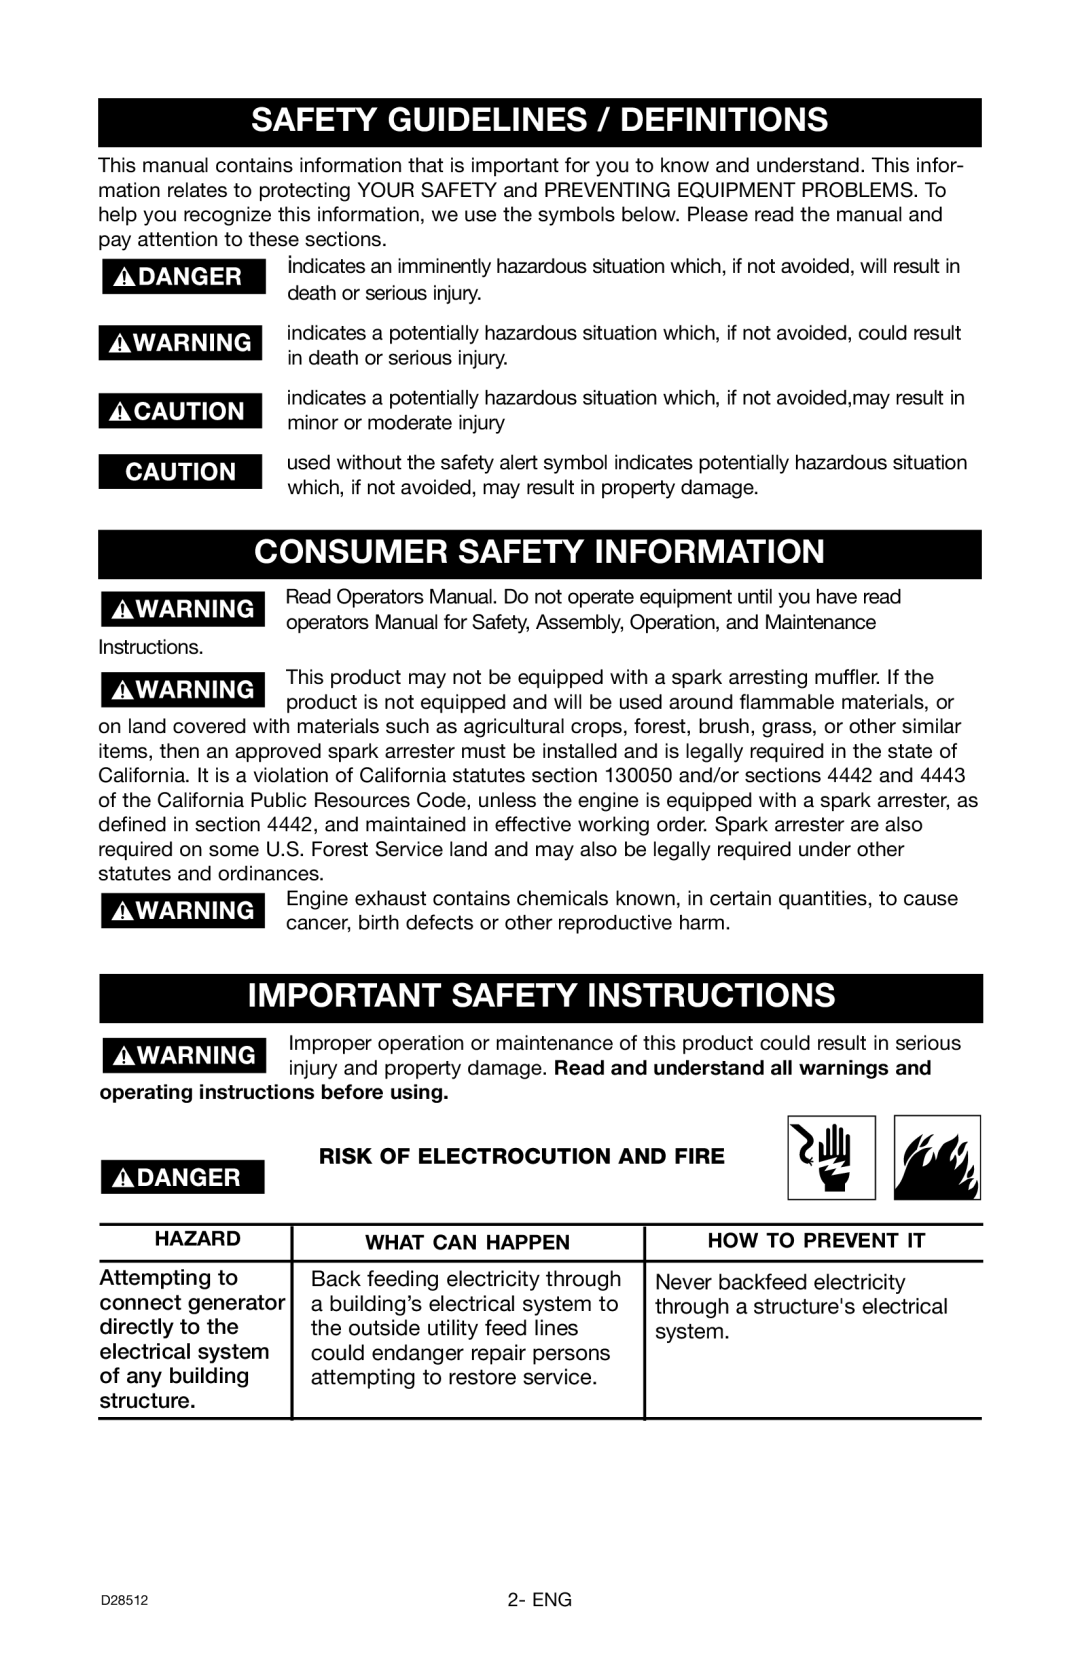 Porter-Cable H450IS Safety Guidelines / Definitions, Consumer Safety Information, Important Safety Instructions 